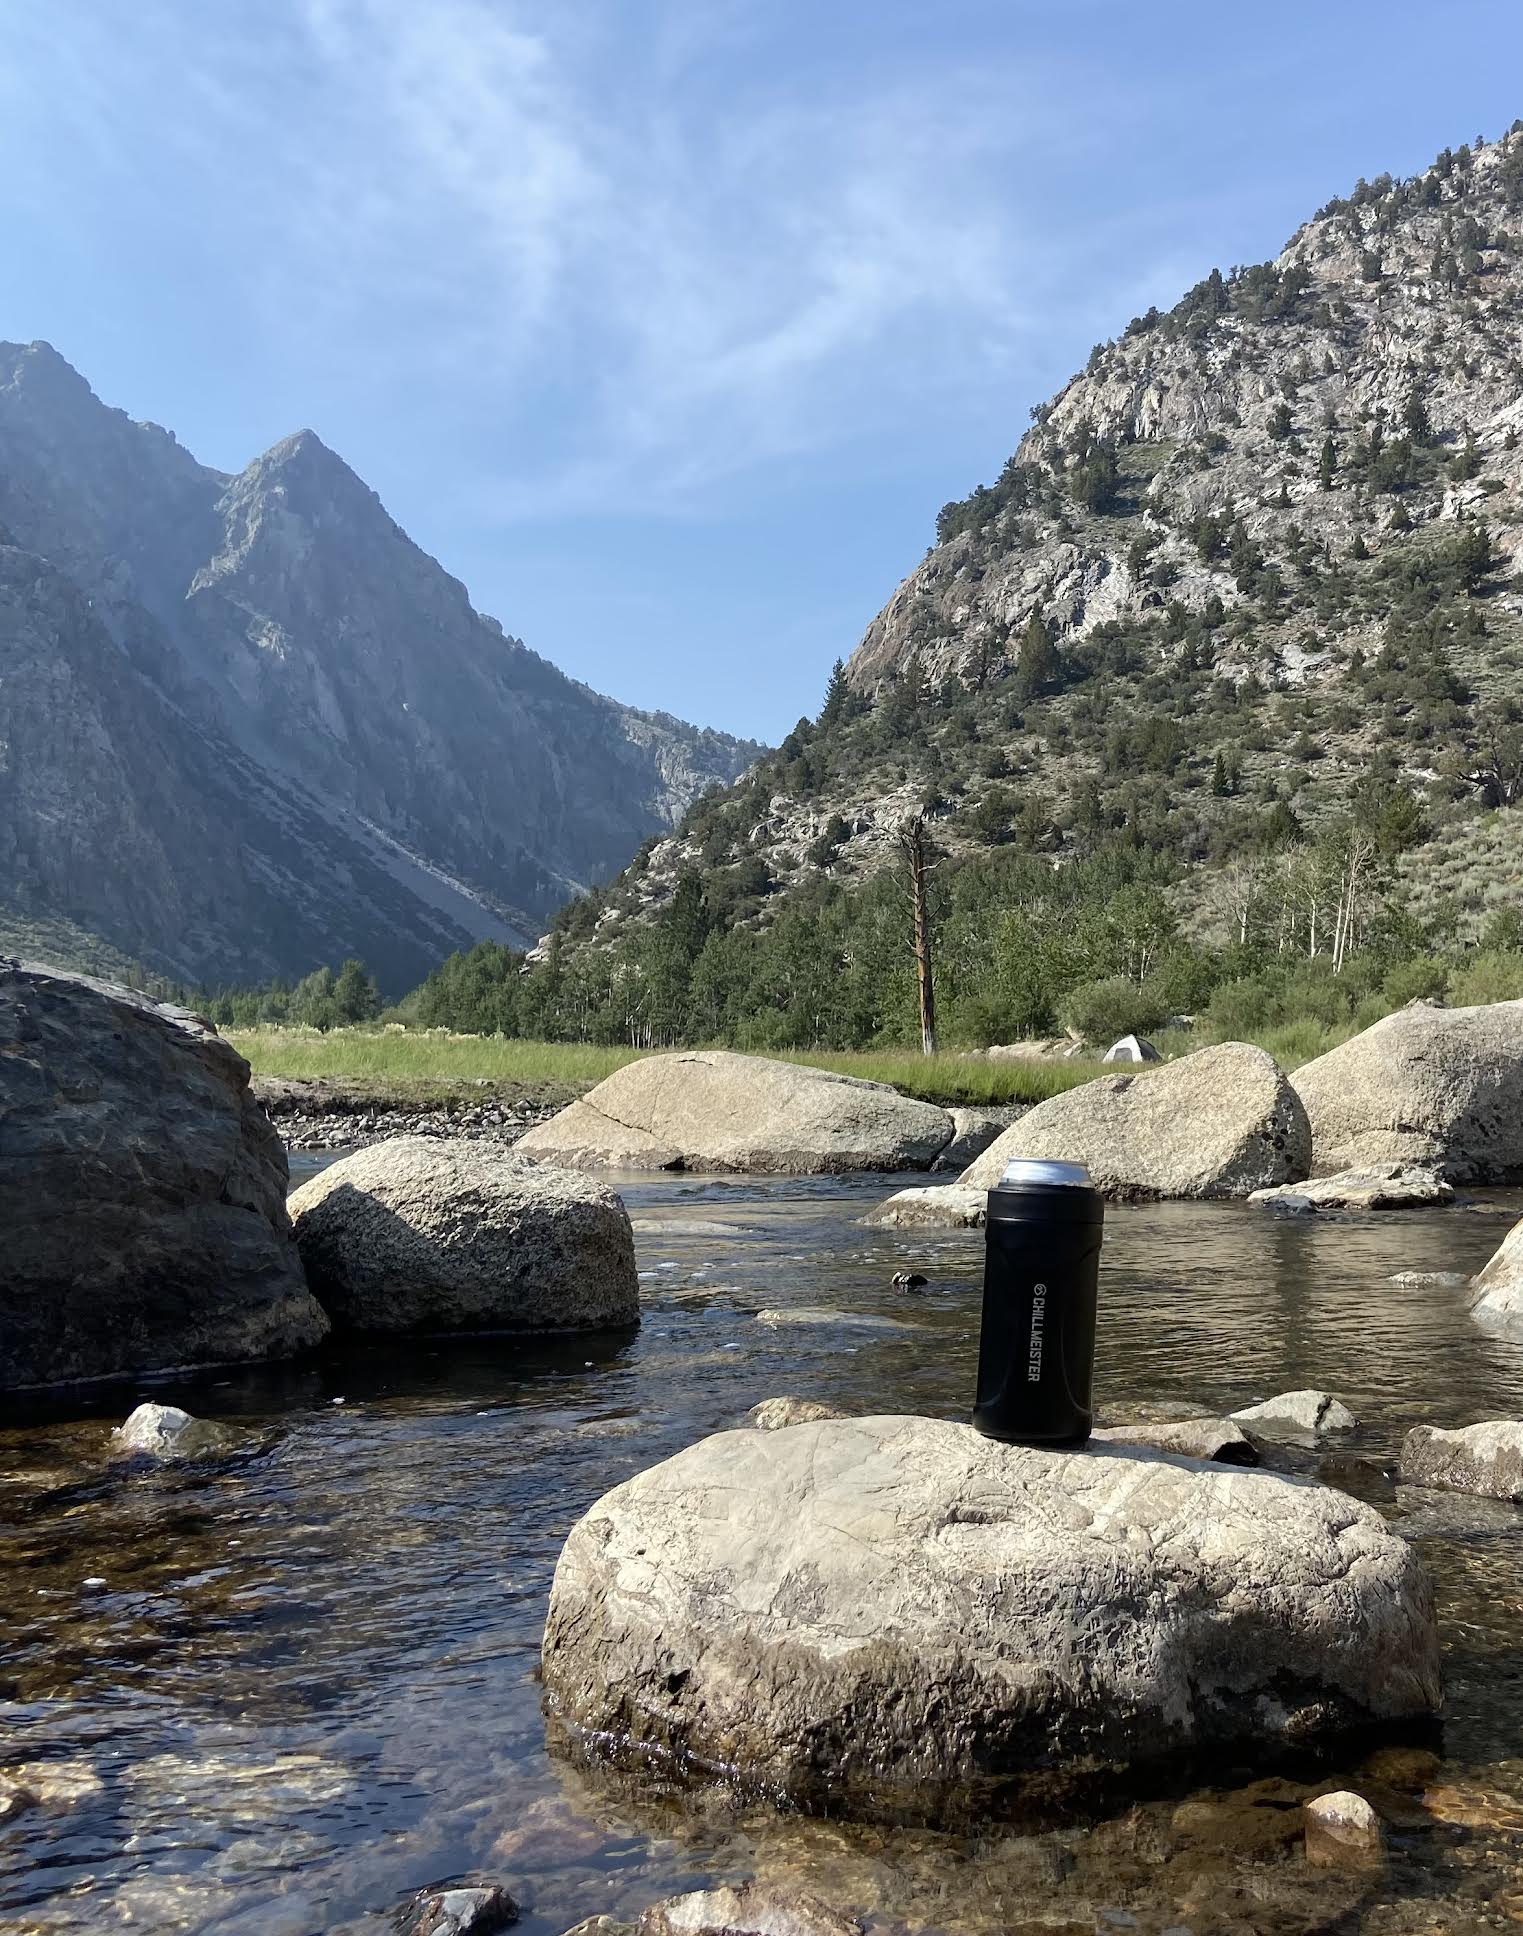 A mountain view scenery with a small river with large rocks. One rock has the matte black can cooler on top of it